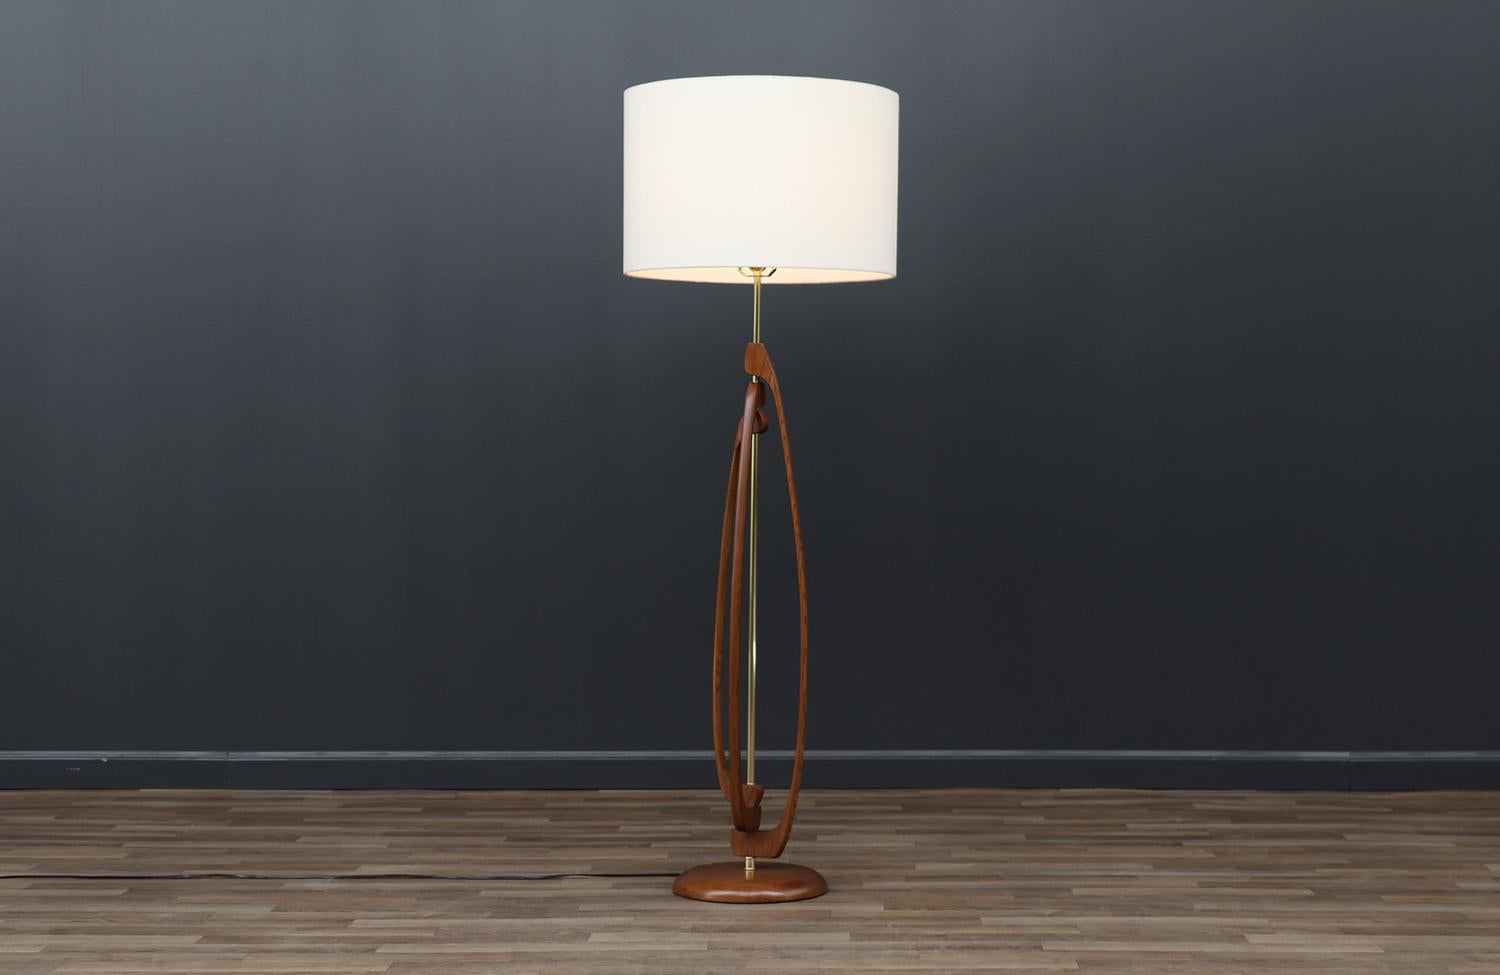 Dimensions

53in H x 10.50in W x 10.50in D
Lamp Shade: 12in H x 18in W
________________________________________

Transforming a piece of Mid-Century Modern furniture is like bringing history back to life, and we take this journey with passion and